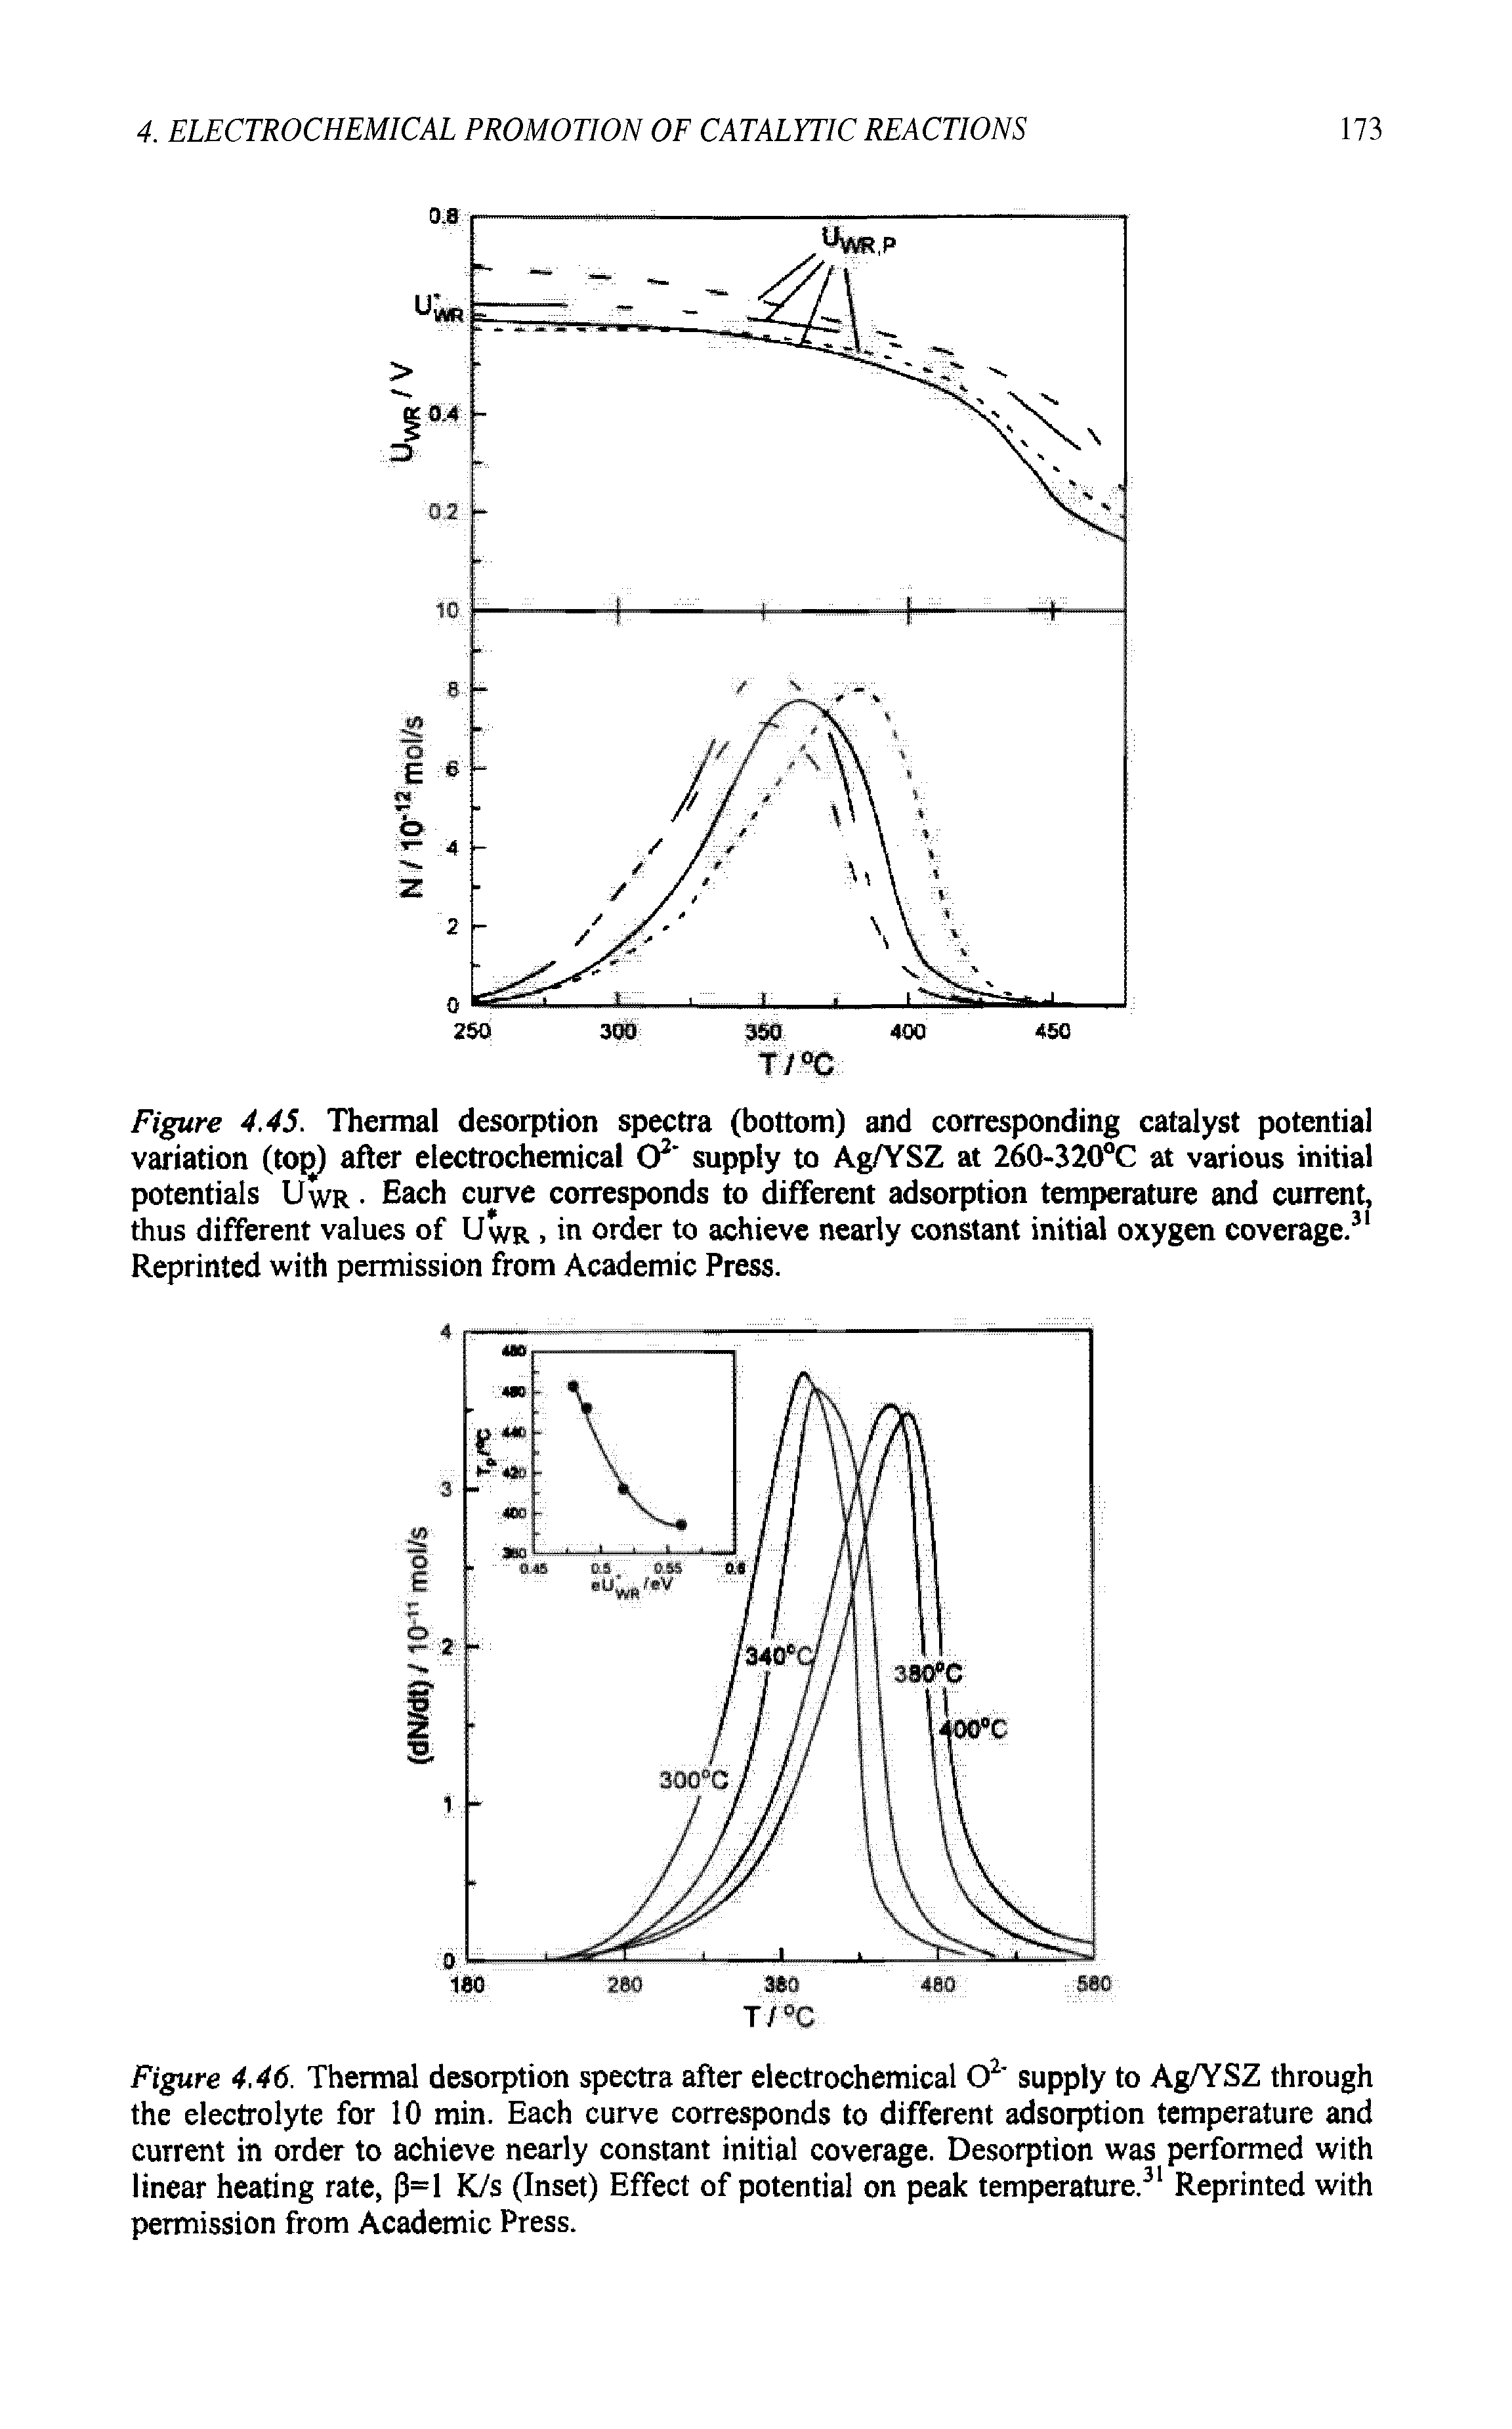 Figure 4.45. Thermal desorption spectra (bottom) and corresponding catalyst potential variation (top) after electrochemical O2 supply to Ag/YSZ at 260-320°C at various initial potentials Uwr Each curve corresponds to different adsorption temperature and current, thus different values of Uwr, in order to achieve nearly constant initial oxygen coverage.31 Reprinted with permission from Academic Press.